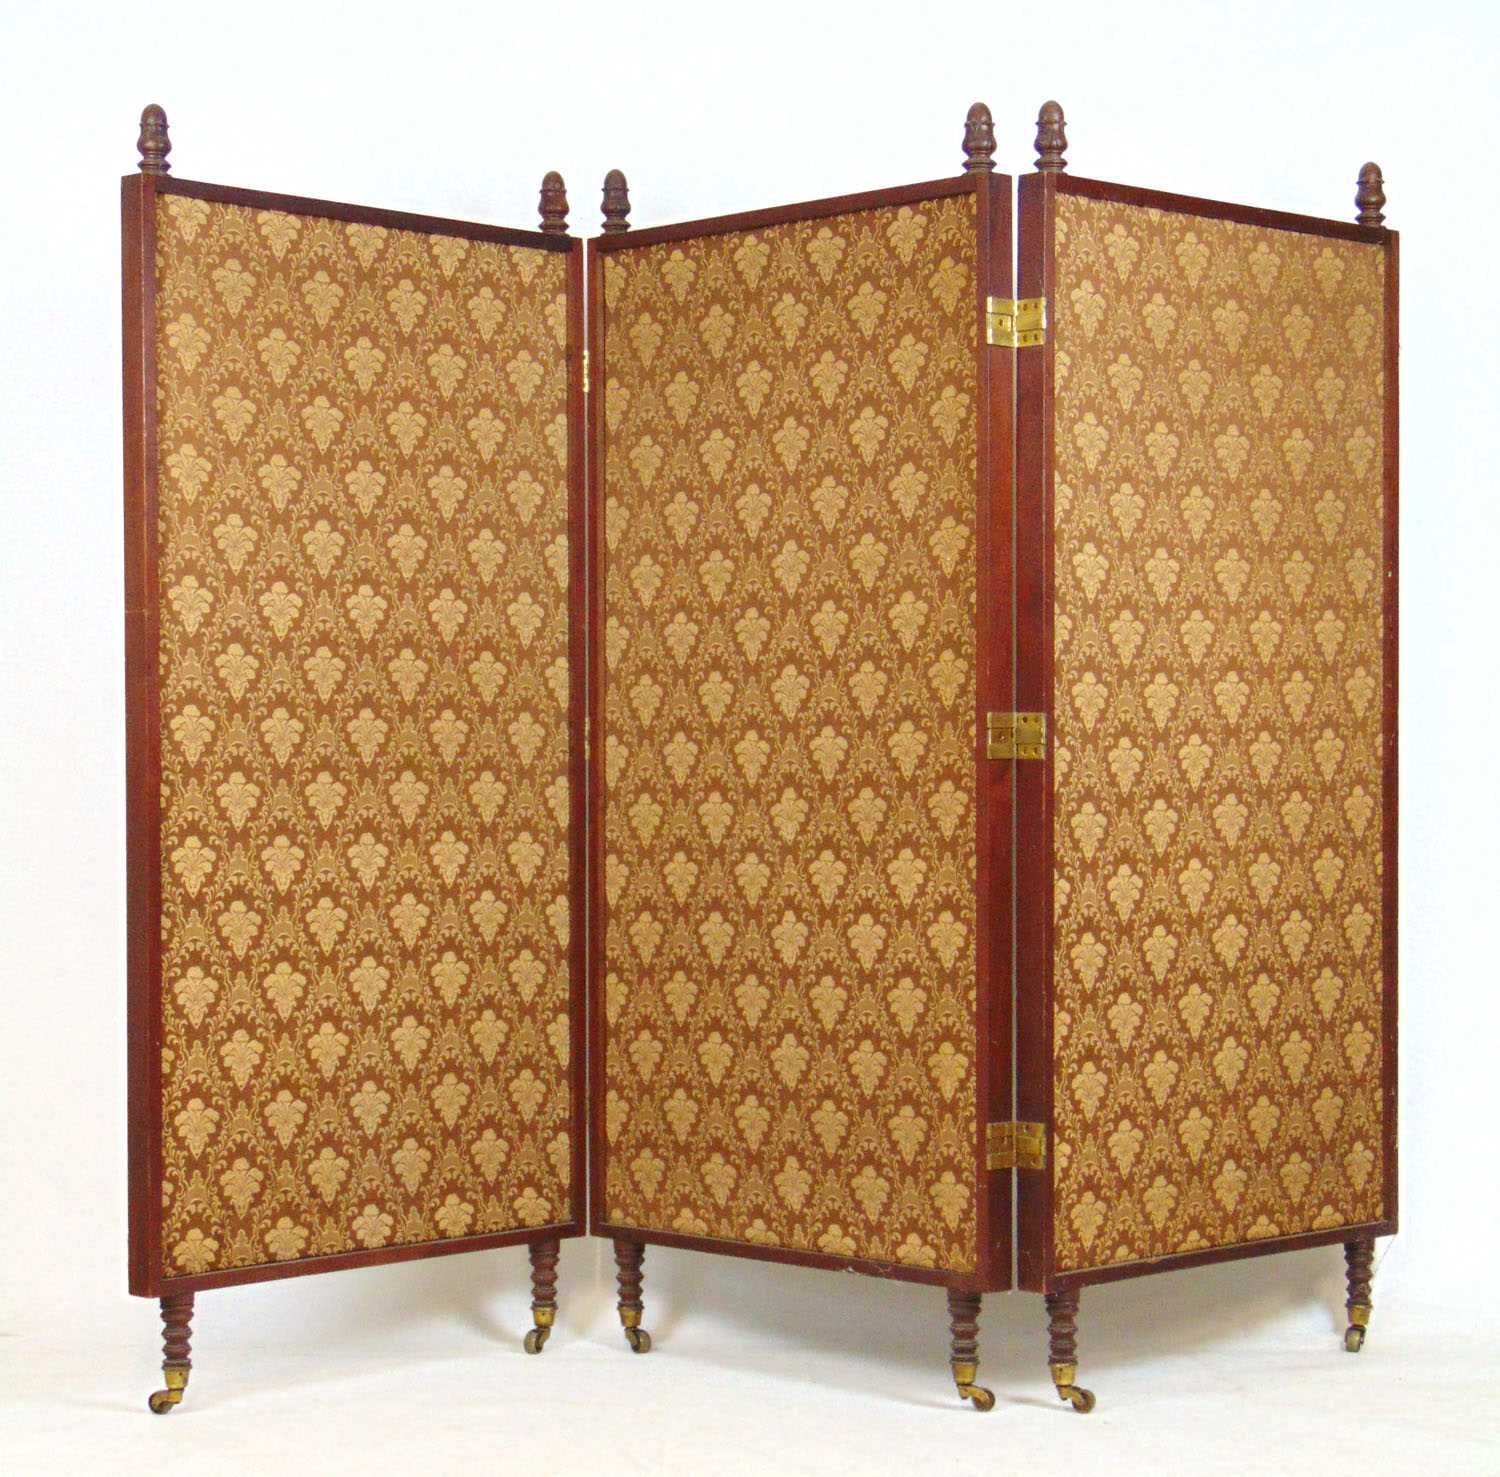 A 19th century walnut three fold screen, the finials over patterned fabric panels on turned feet and - Image 2 of 2